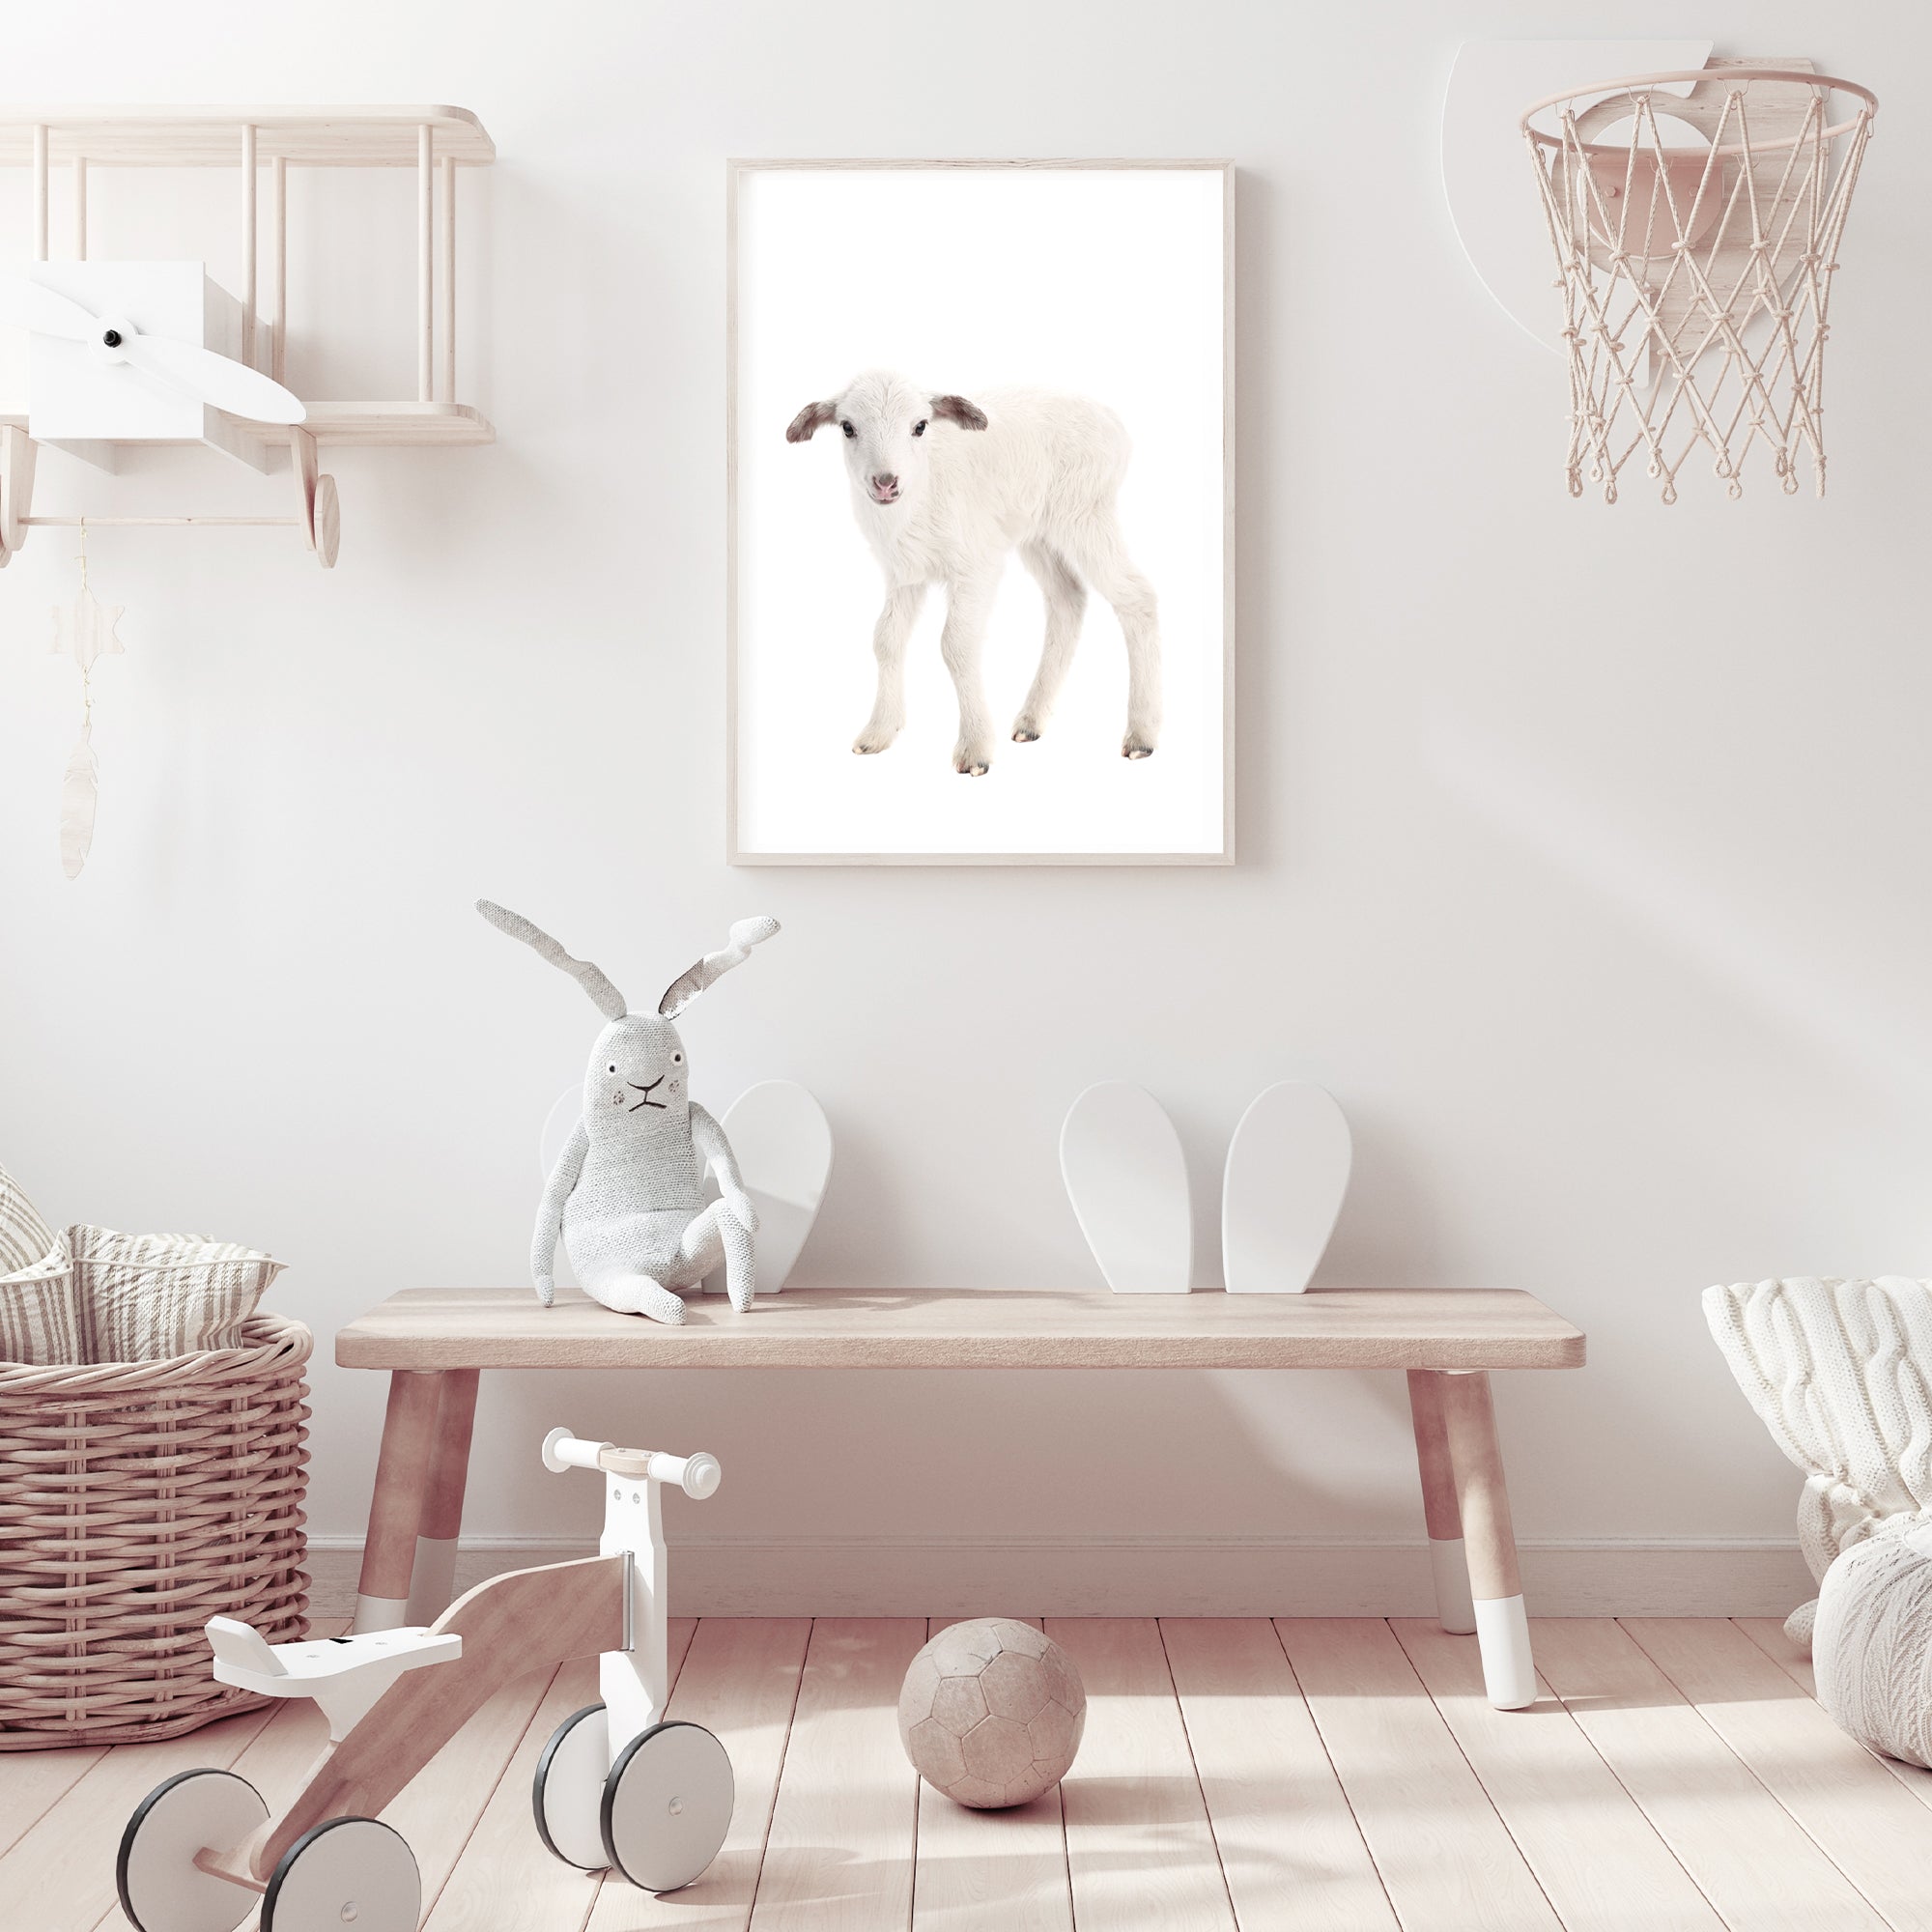 Perfect for your nursery, featuring the animal Baby Lamb photo art print, available in an unframed poster print, stretched canvas or with a timber, white or black frame.